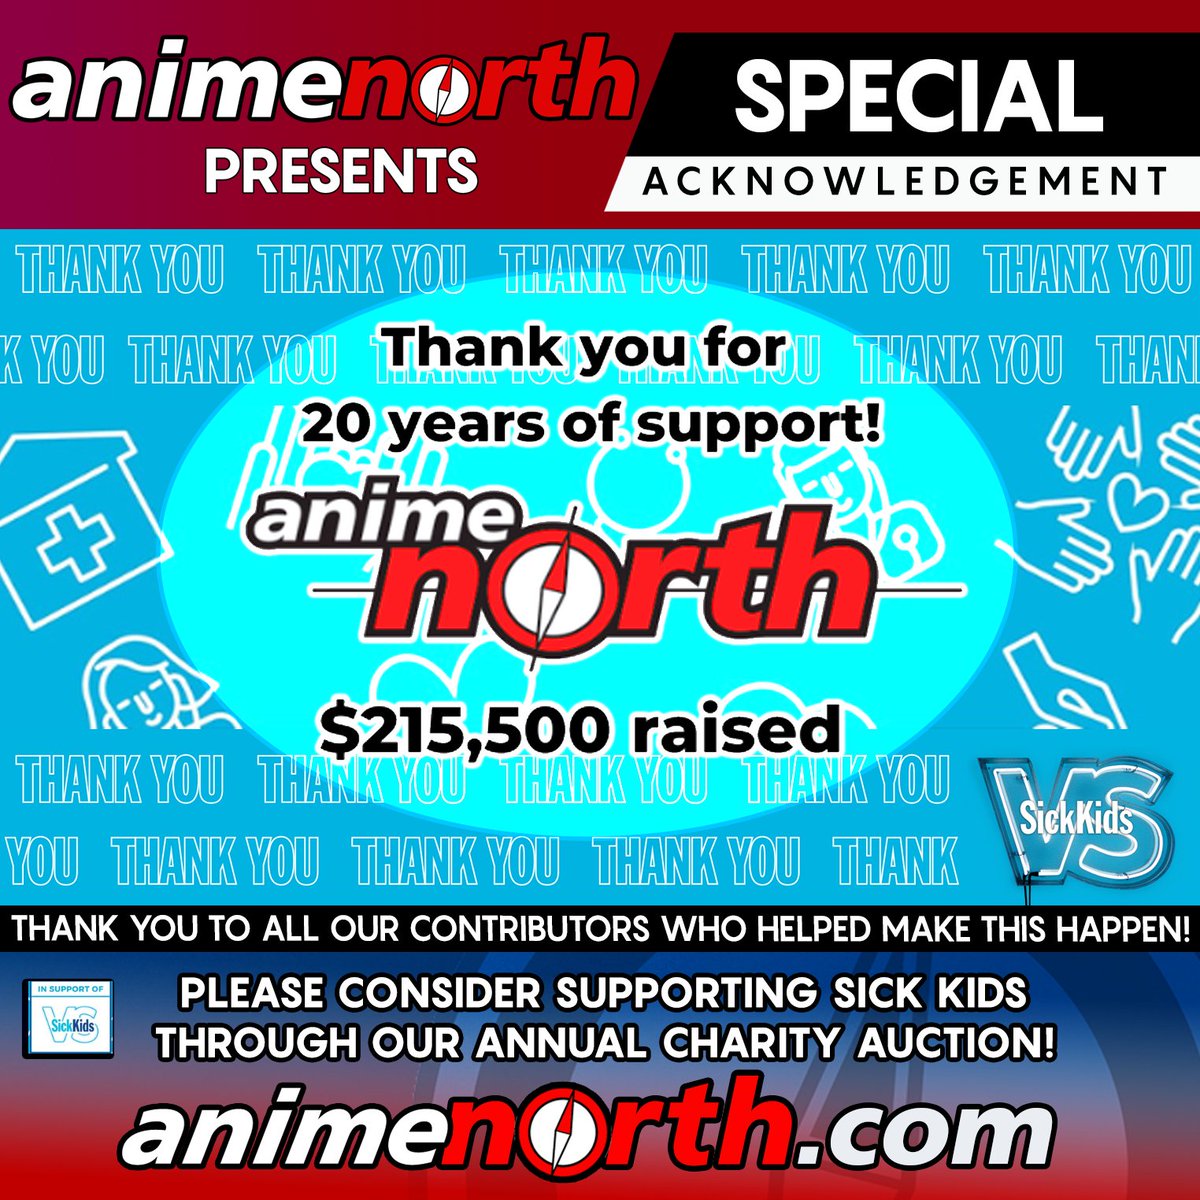 Thank you to everyone that has helped us over the pass 20 years to raise $215,500 for @sickkids. Please consider continuing your support through our annual Charity Auction, returning Sunday, May 28 at #AnimeNorth2023

#SickKidsVS